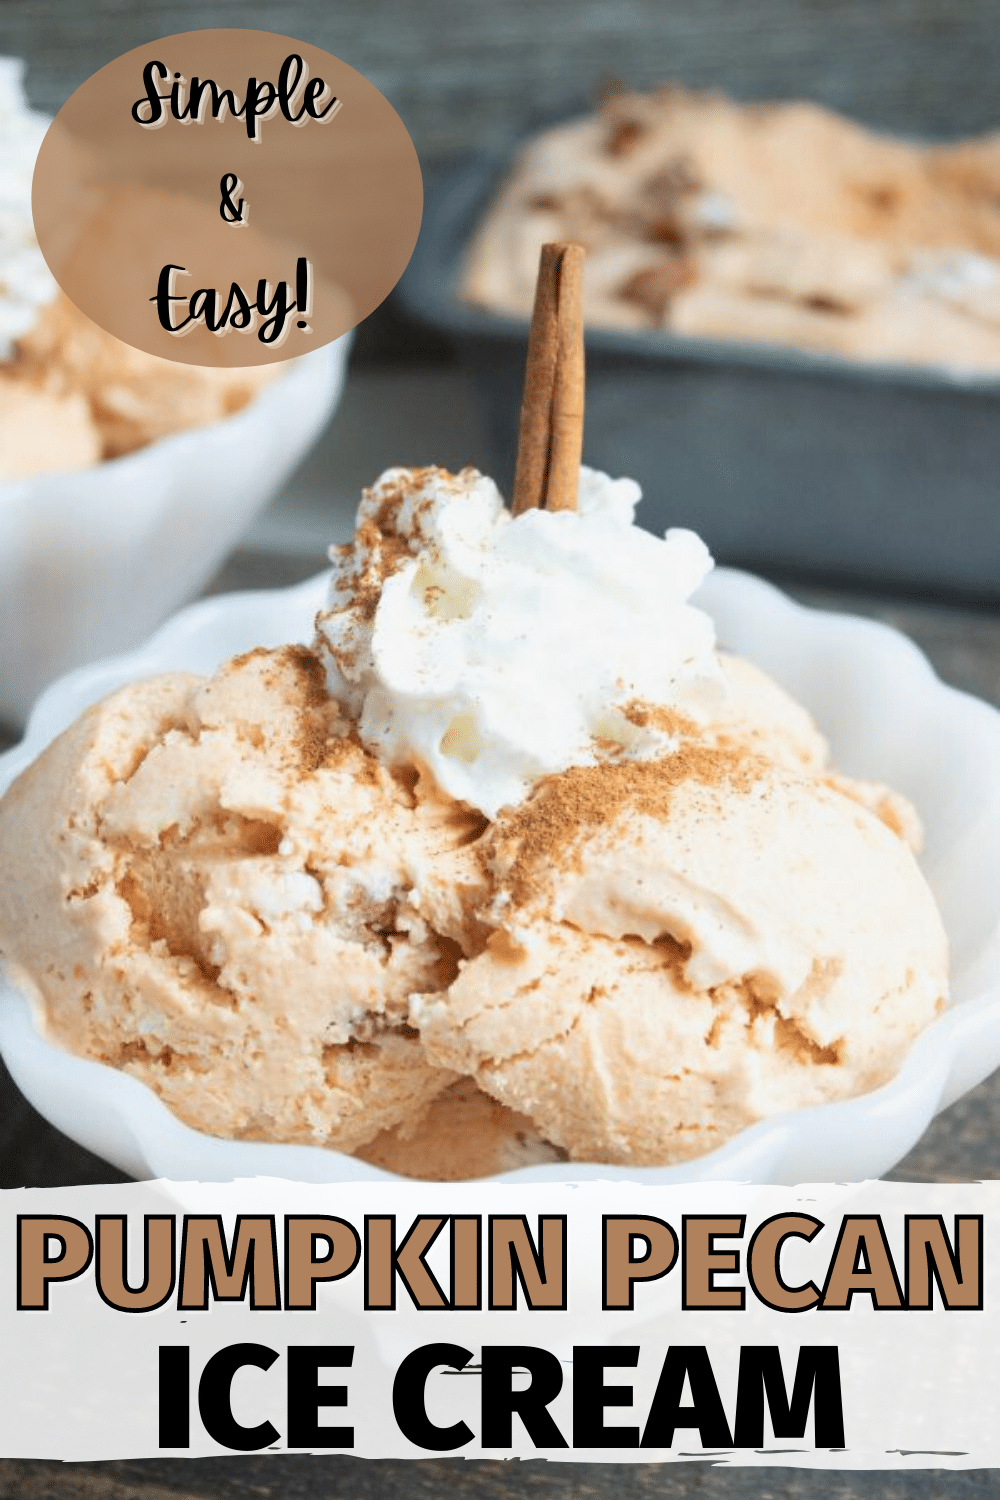 Homemade pumpkin pecan ice cream is delicious, creamy and full of fall flavors. This is a no churn ice cream recipe made with sweetened condensed milk. #pumpkin #icecream #nochurnicecream via @wondermomwannab